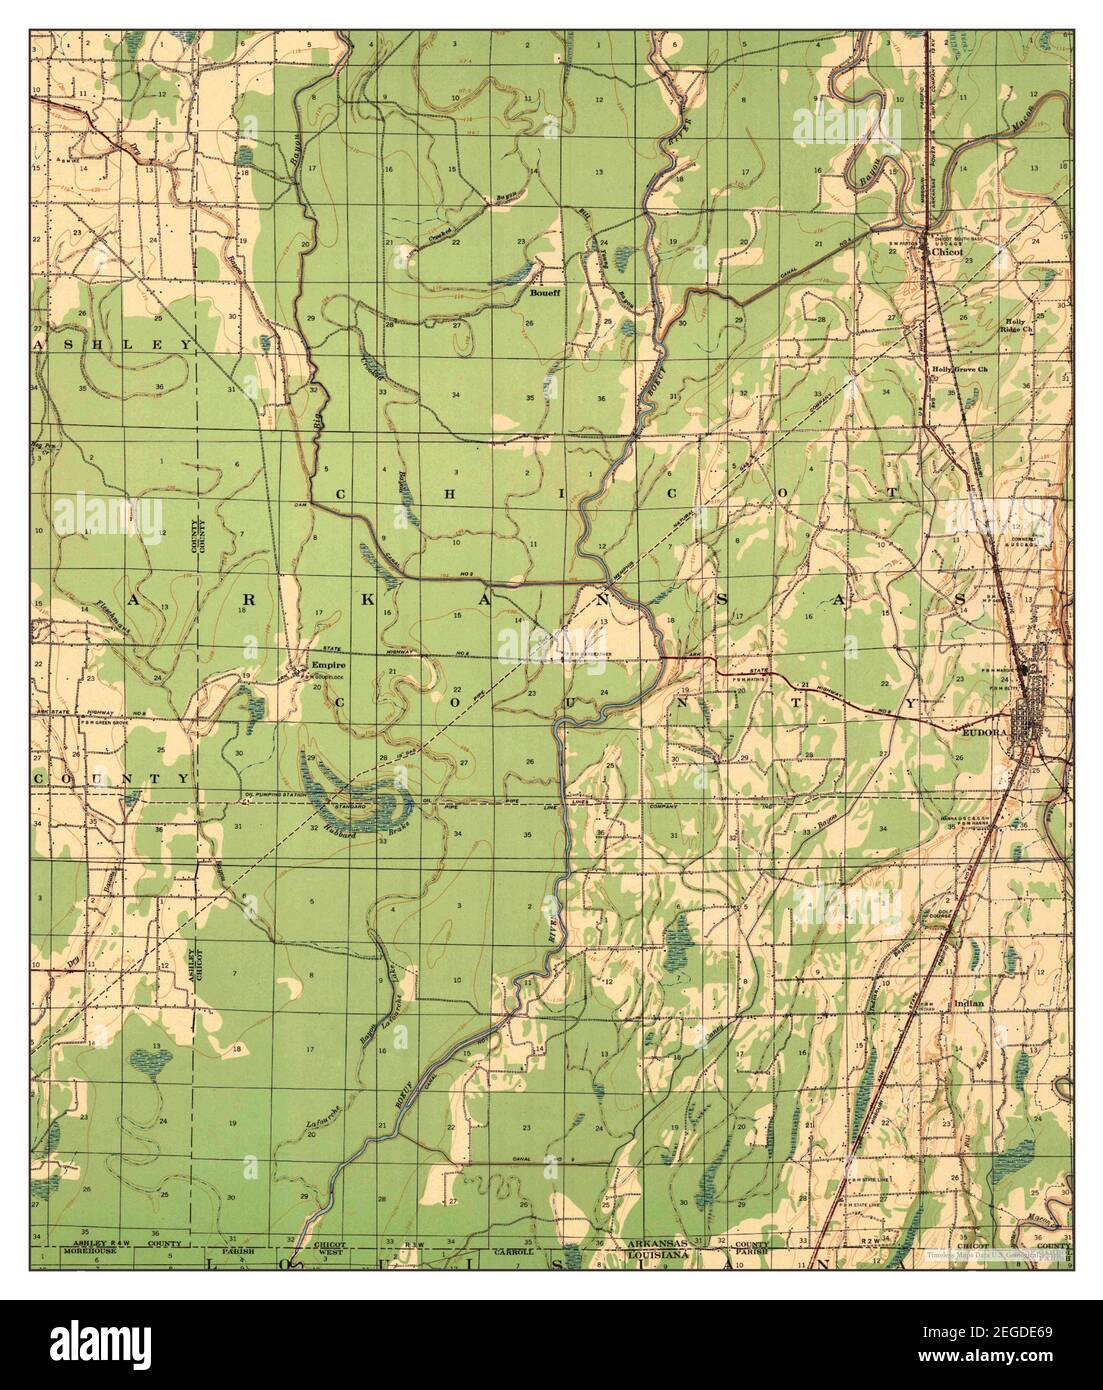 DX 1969-1973 state road maps AR. La,-MS.Eastern US,Ill.,IA. Details about   Sunoco and OK.